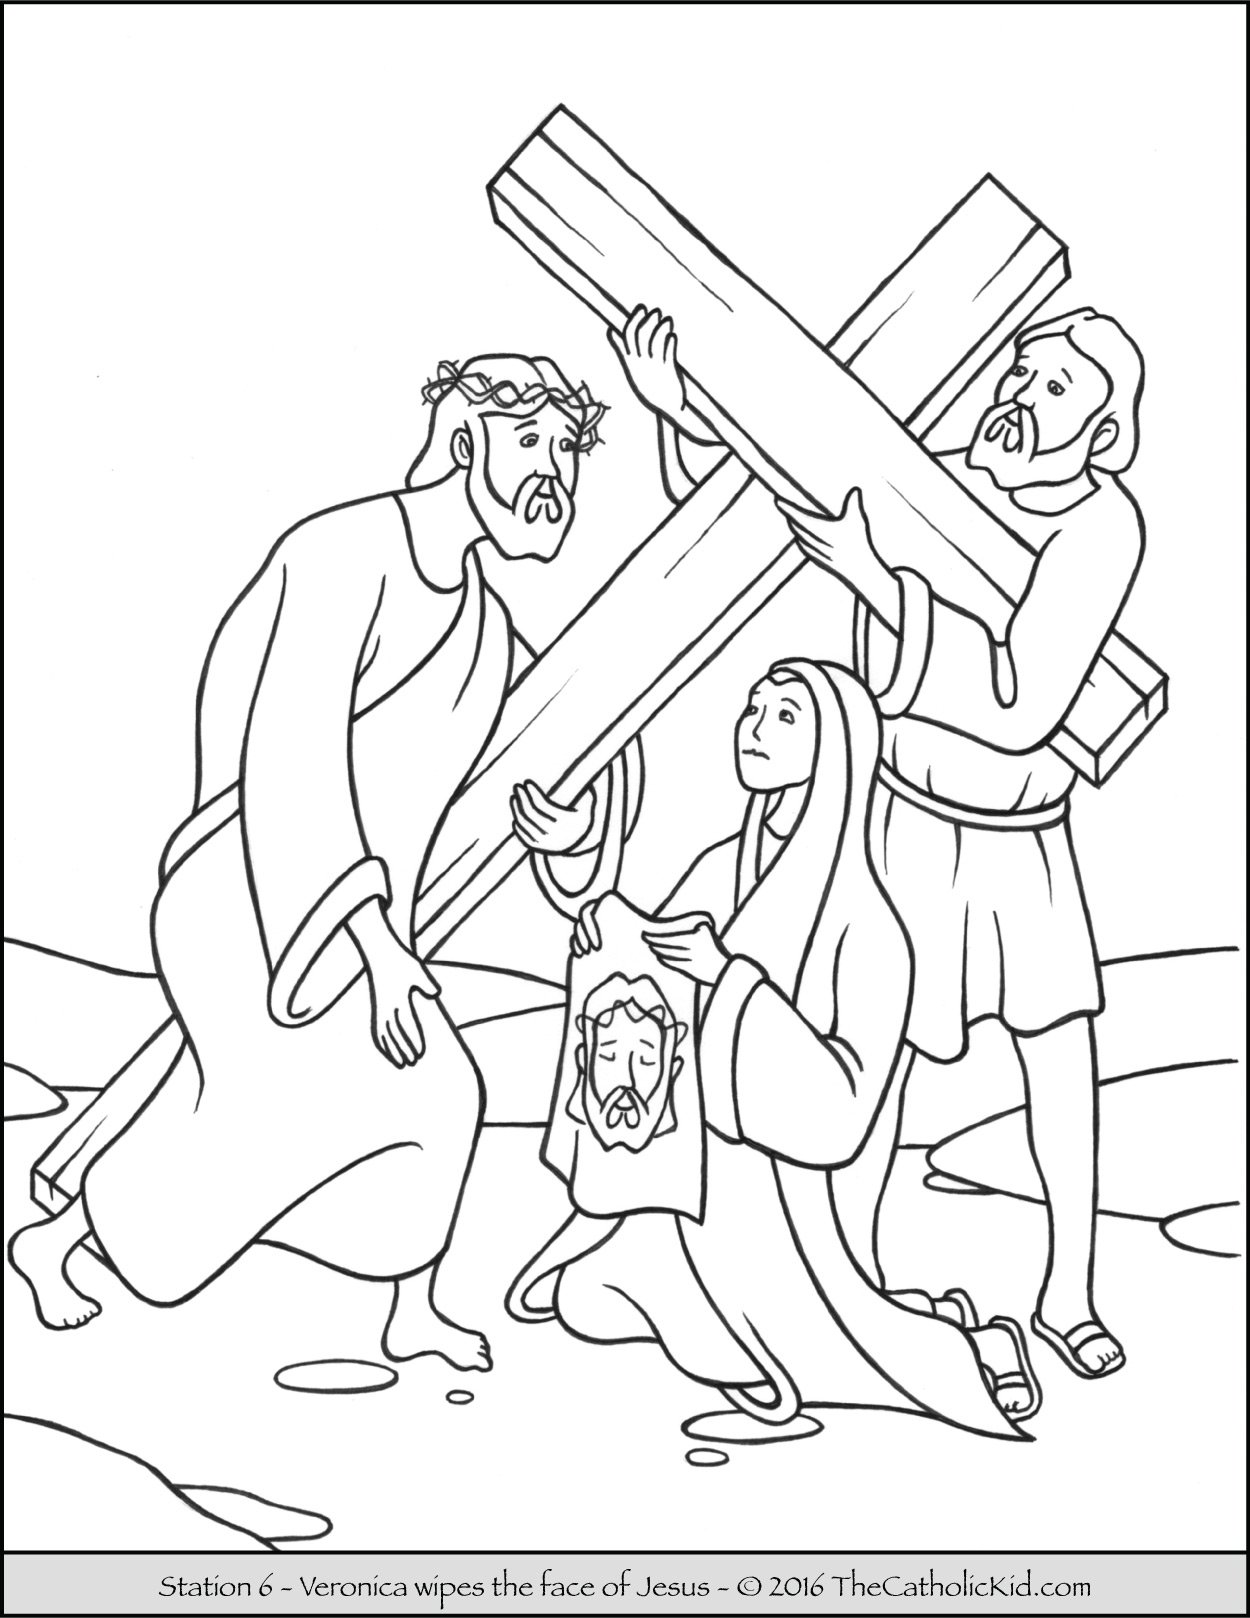 Stations of the cross for kids